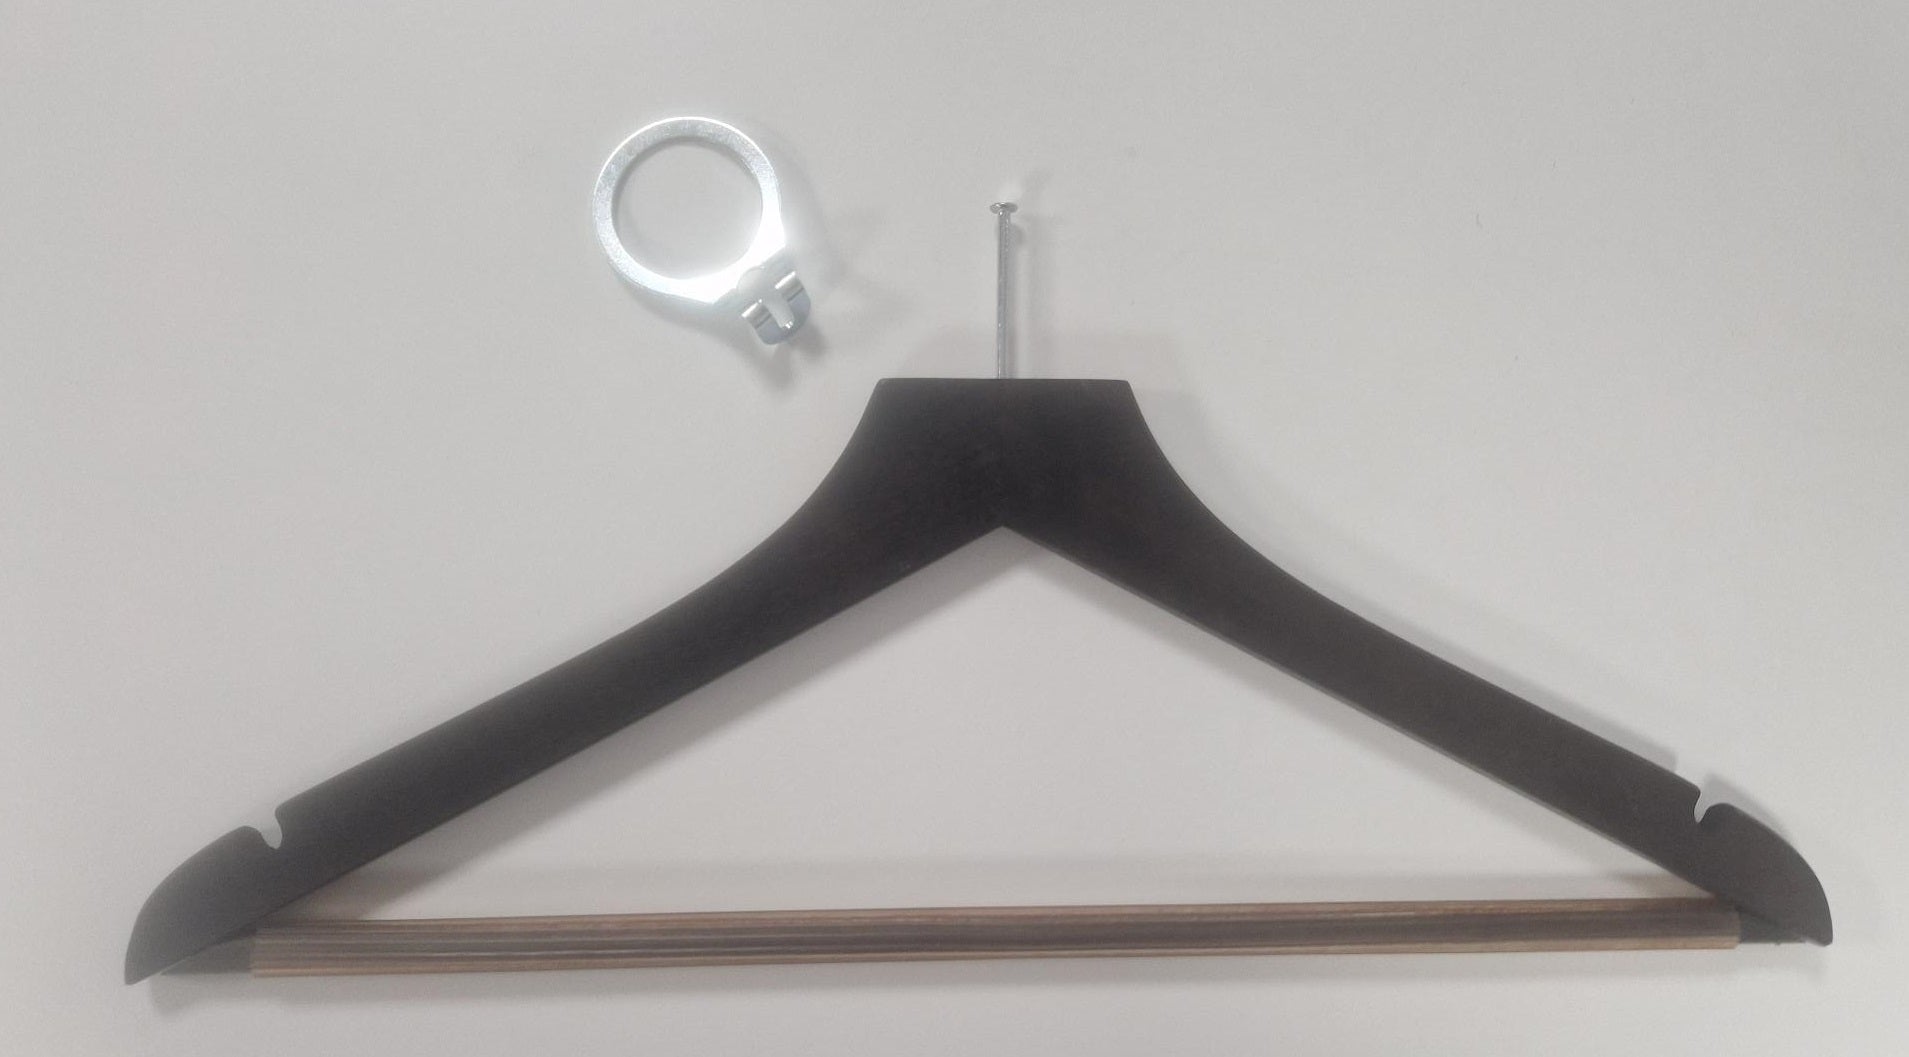 A Hangers of London Wooden Hotel Anti Theft Jacket (Dark Brown) 44cm is lying against a white background. Above the hanger is a metal ring-like object with a small bracket attached, emphasizing security priority for guests.